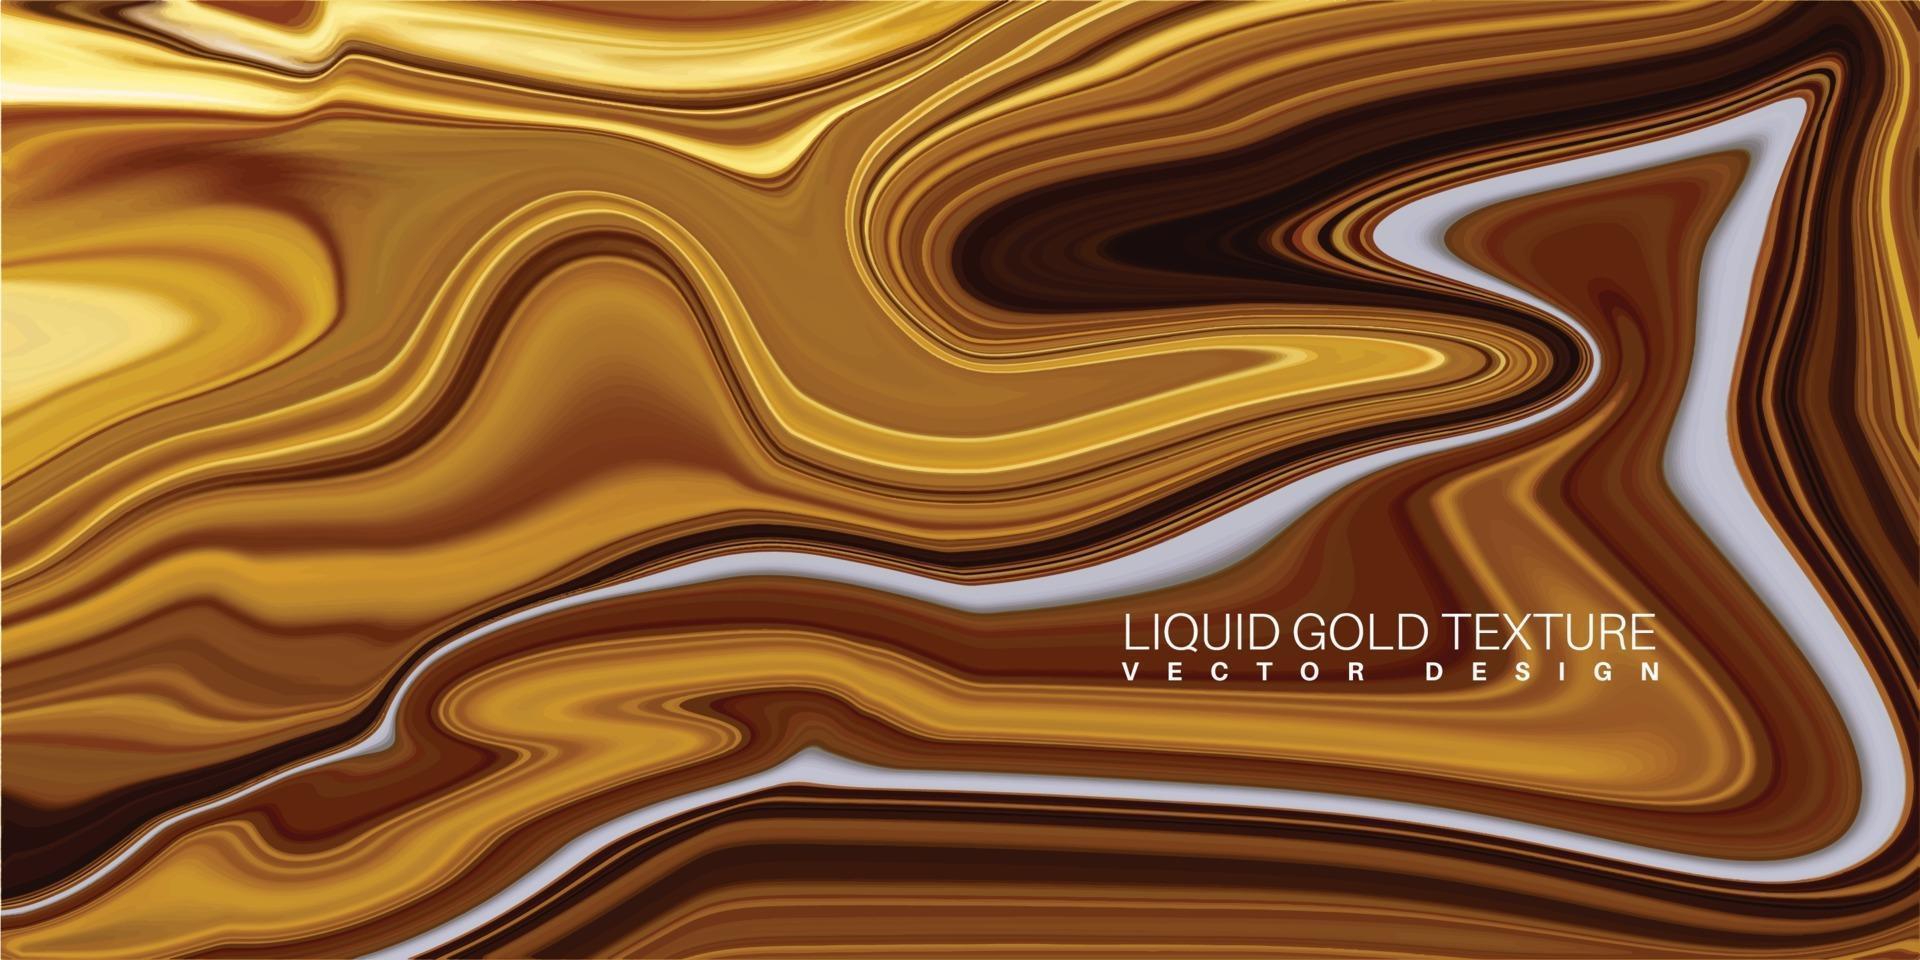 liquid gold abstract texture. vector illustration background design